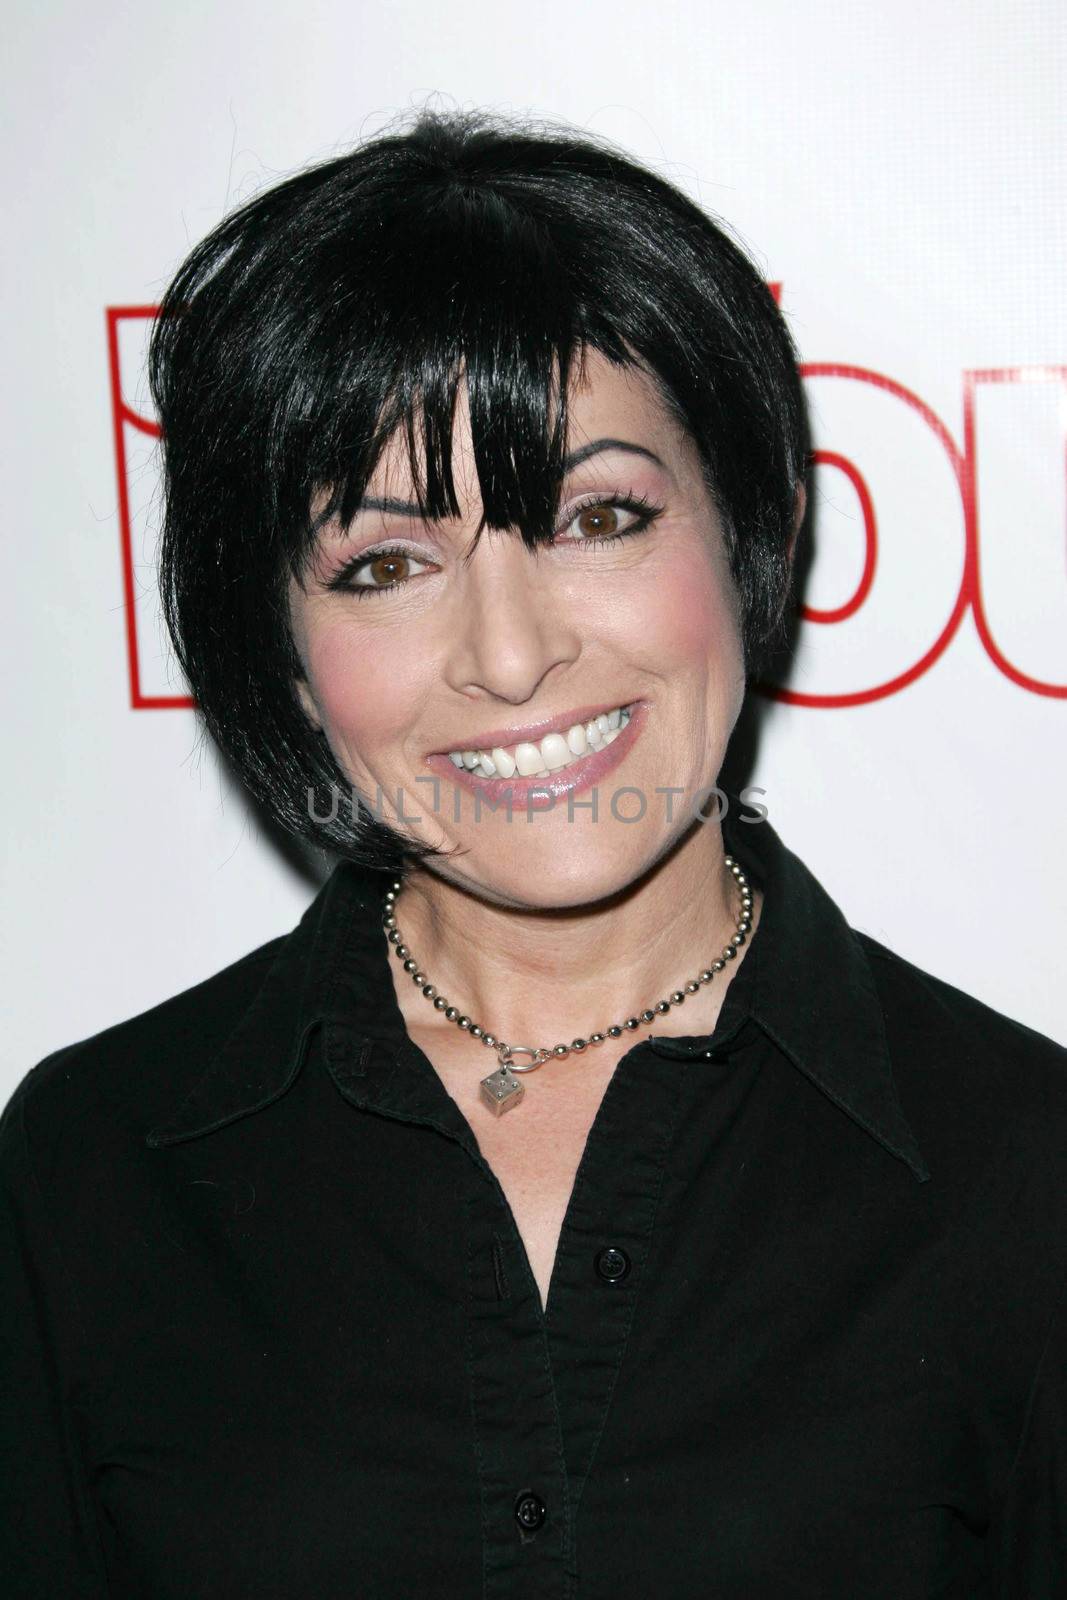 Jane Wiedlin at the In Touch Presents Pets And Their Stars Party, Cabana Club, Hollywood, CA 09-21-05